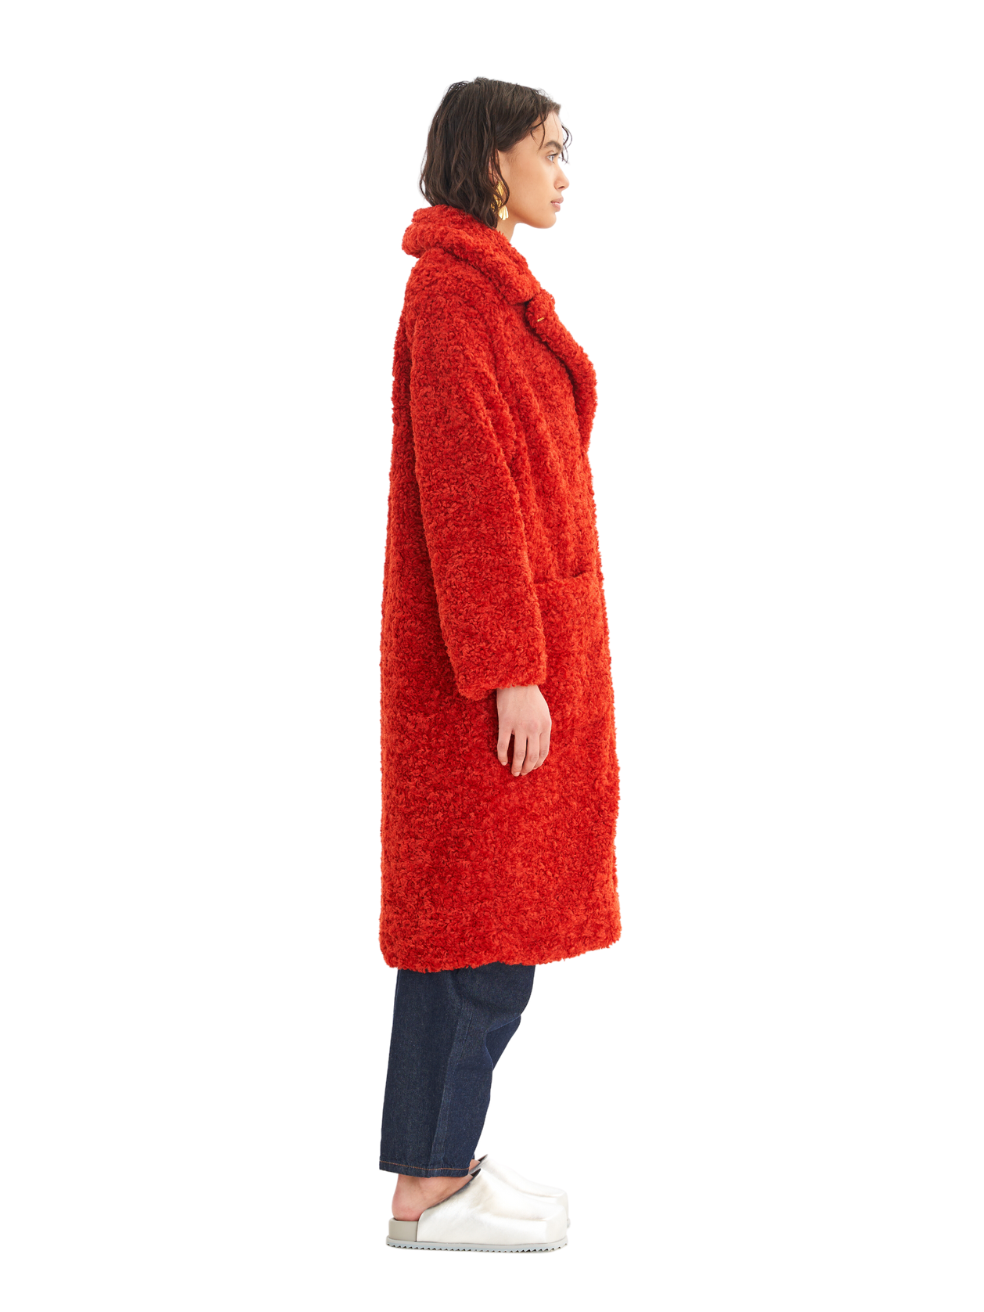 Ruby Red Ethical Outerwear Made in Canada Upcycled Vegan Sherpa Long Teddy Coat